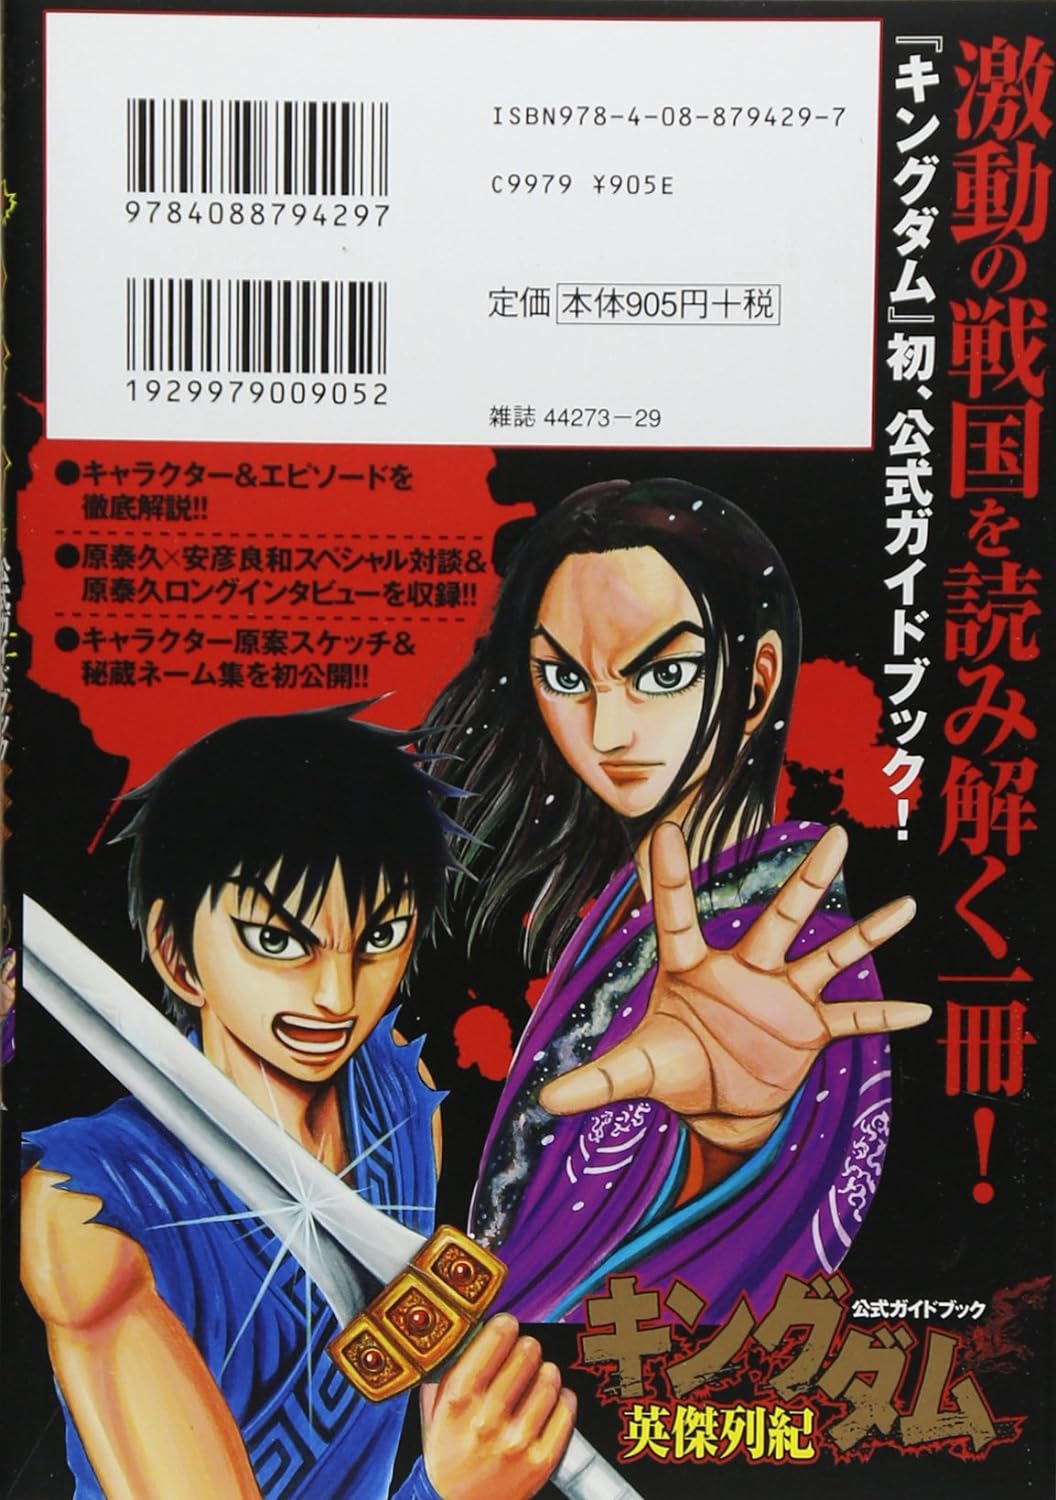 KINGDOM OFFICIAL GUIDEBOOK HEROIC CHRONICLES (YOUNG JUMP COMICS)